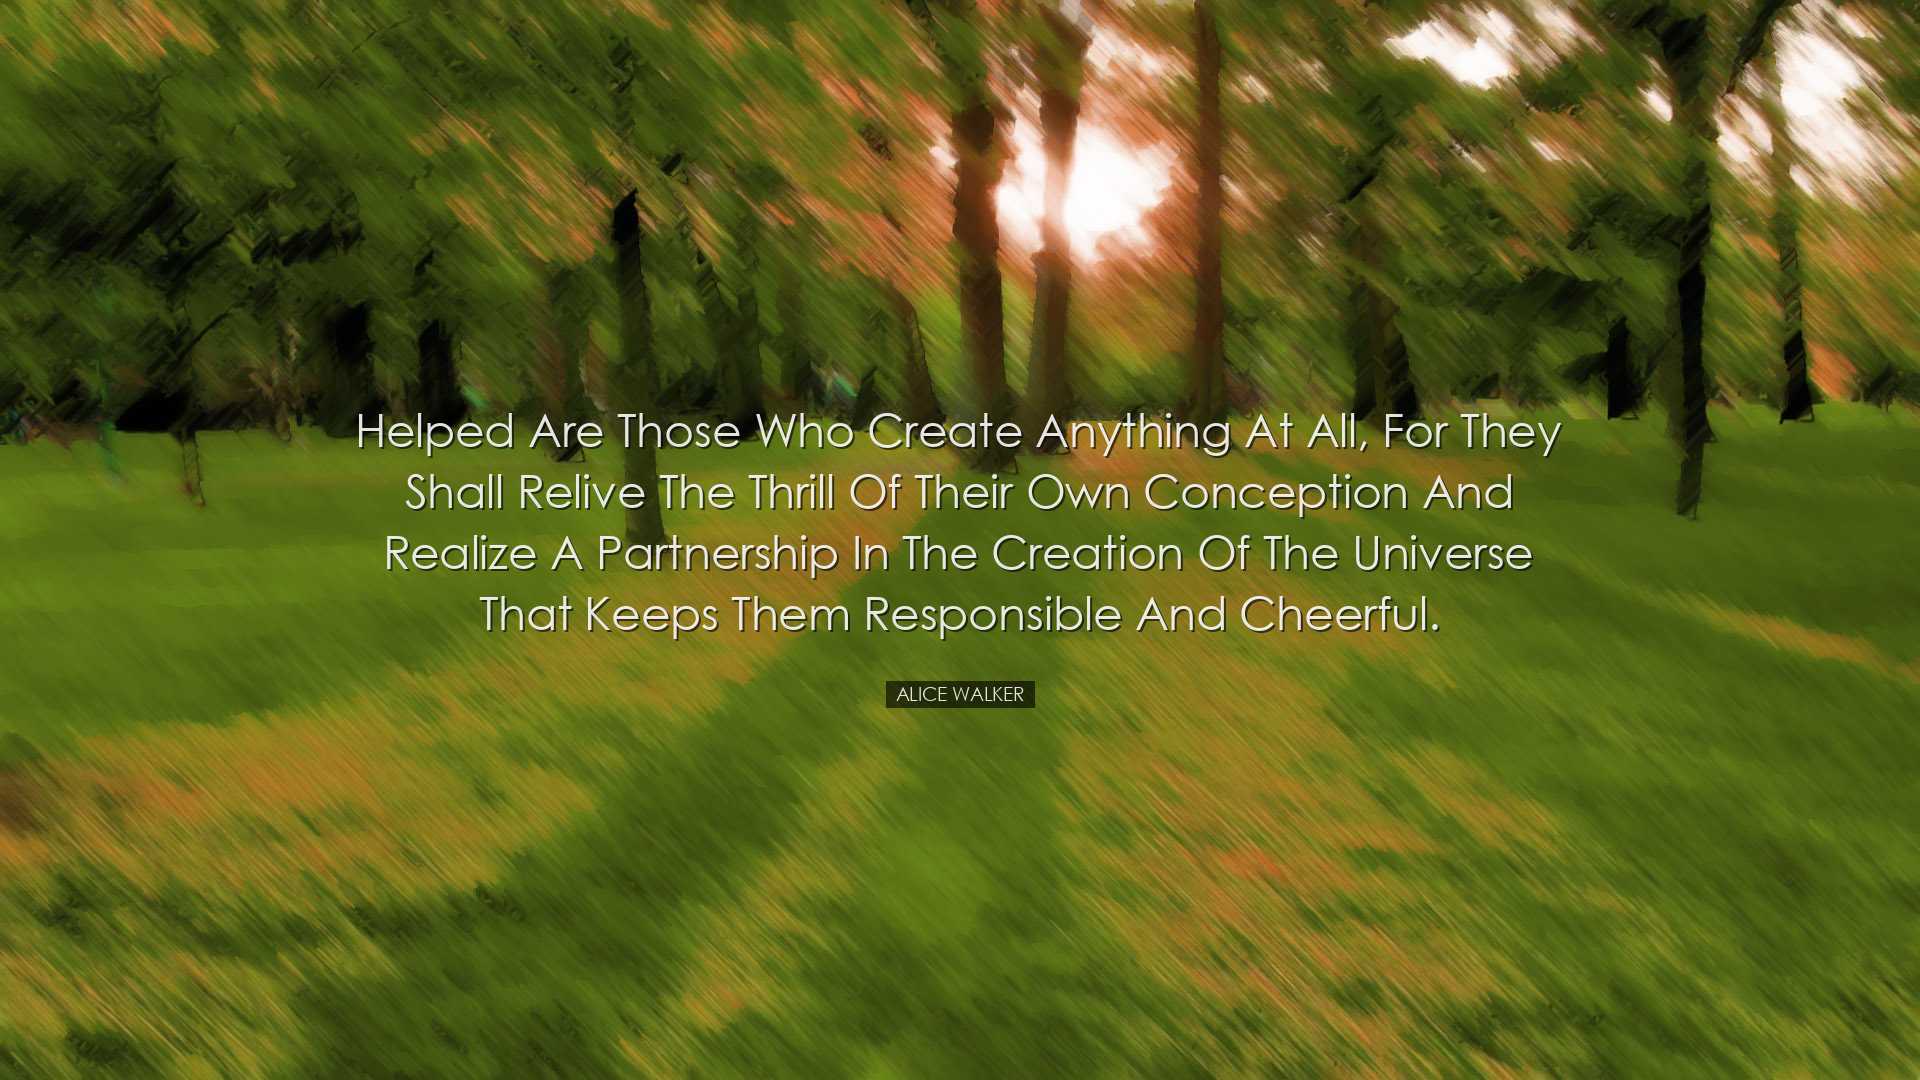 Helped are those who create anything at all, for they shall relive